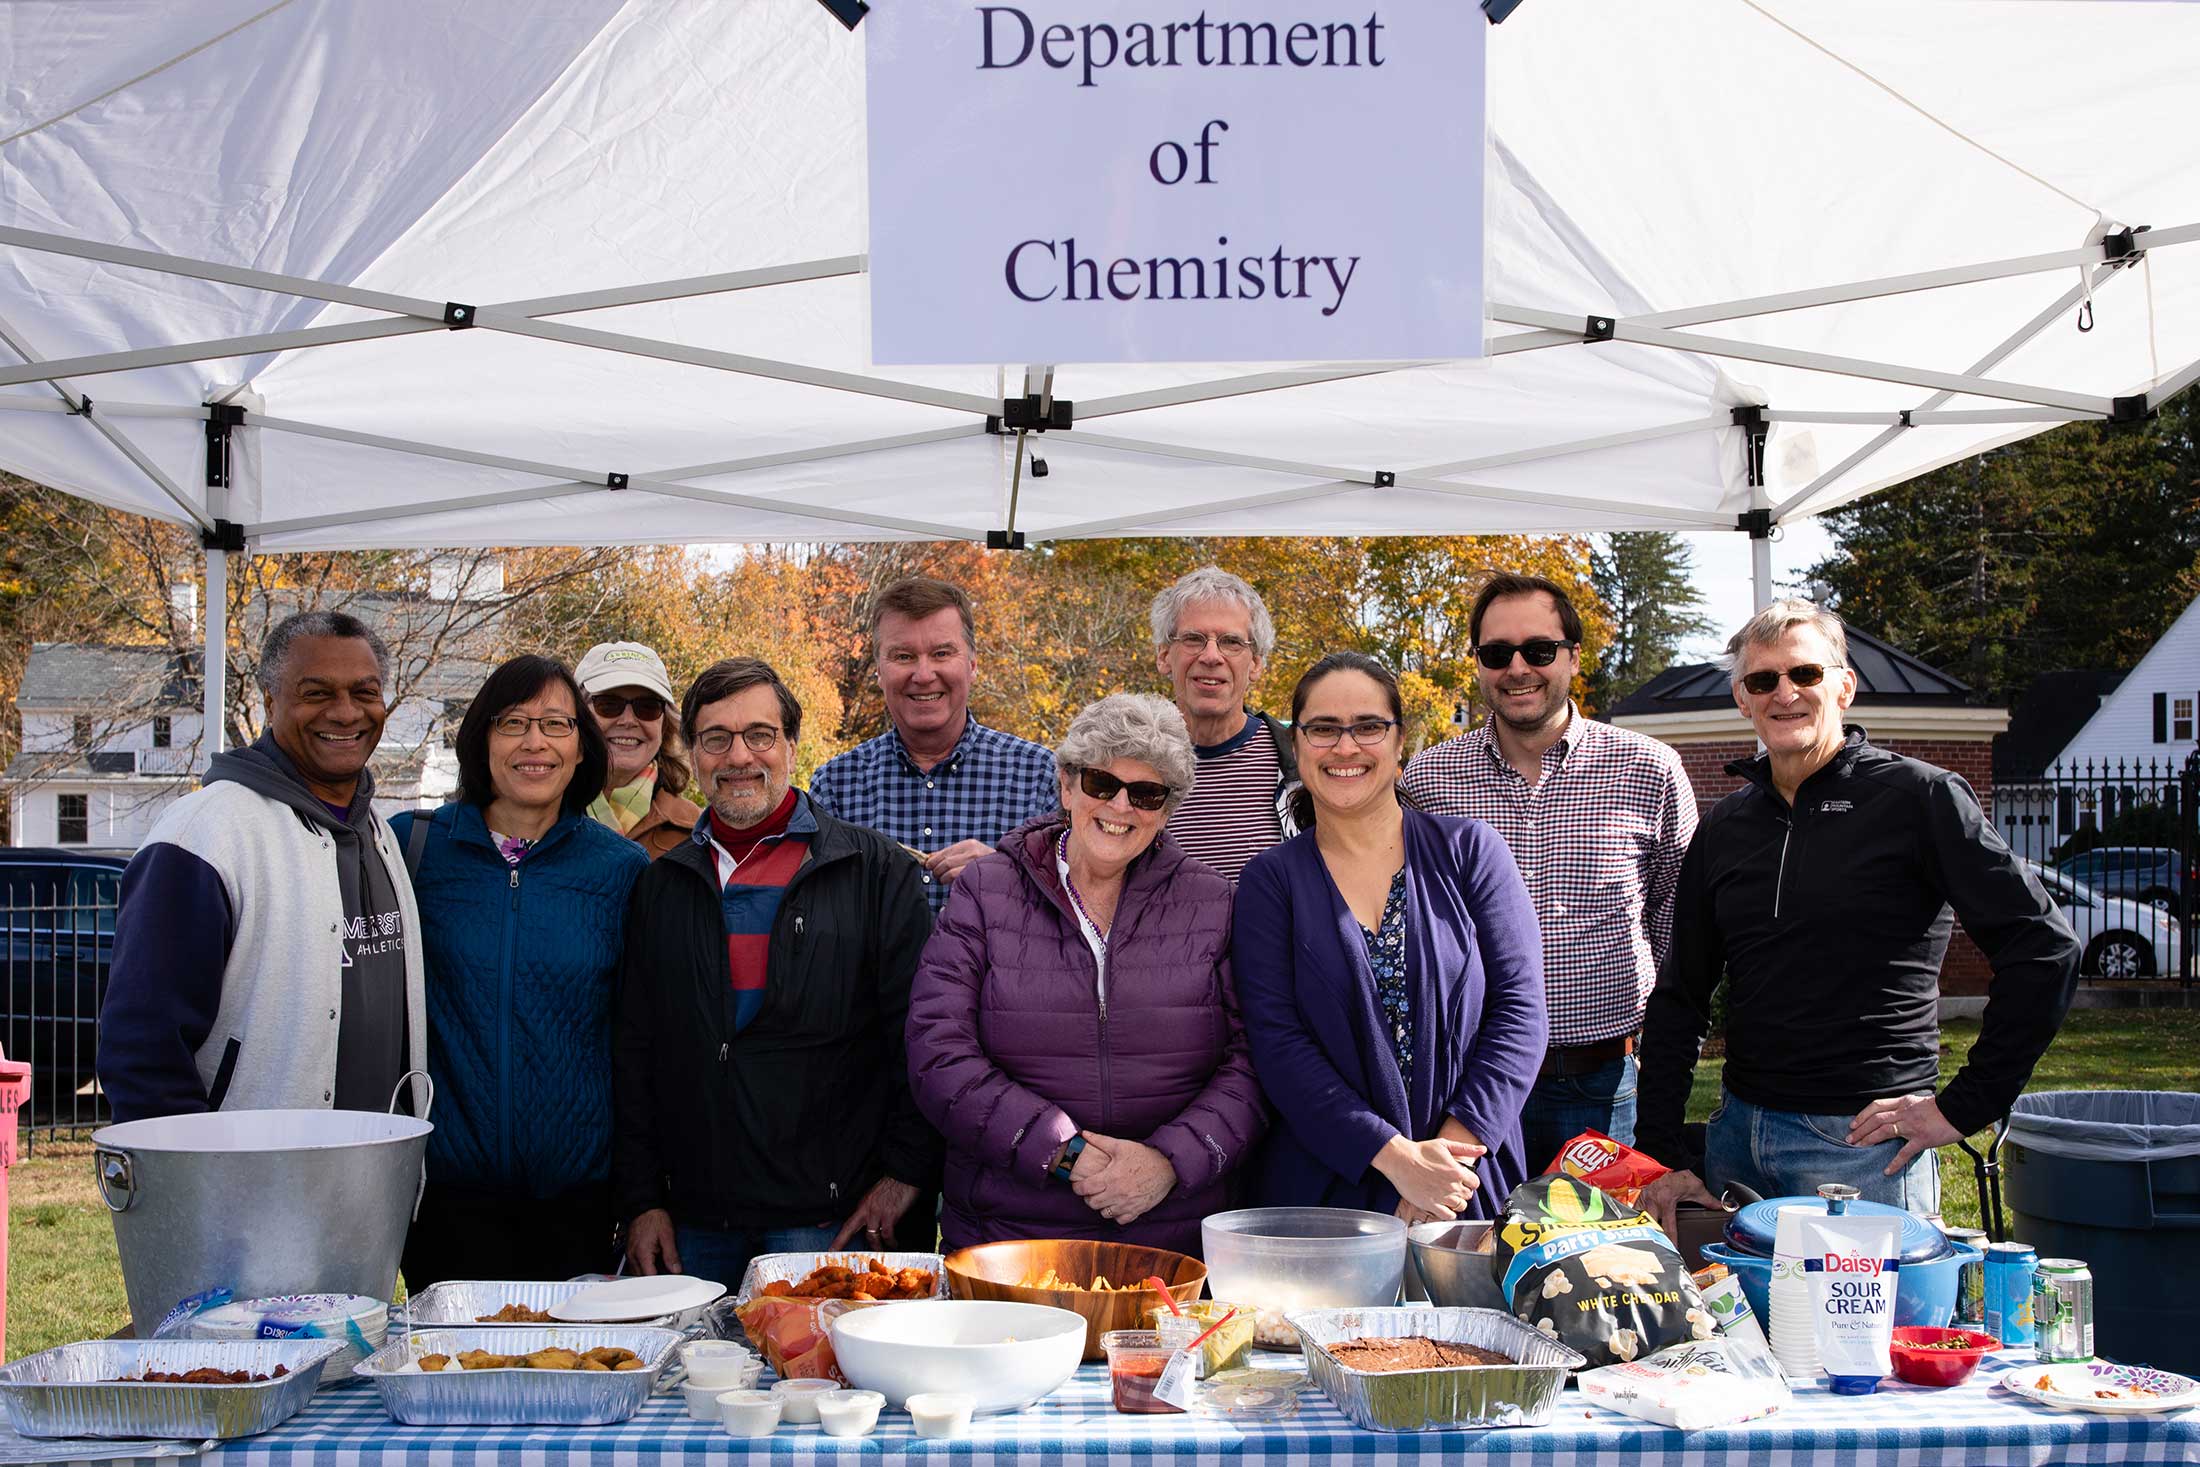 The Department of Chemistry hosting a reception